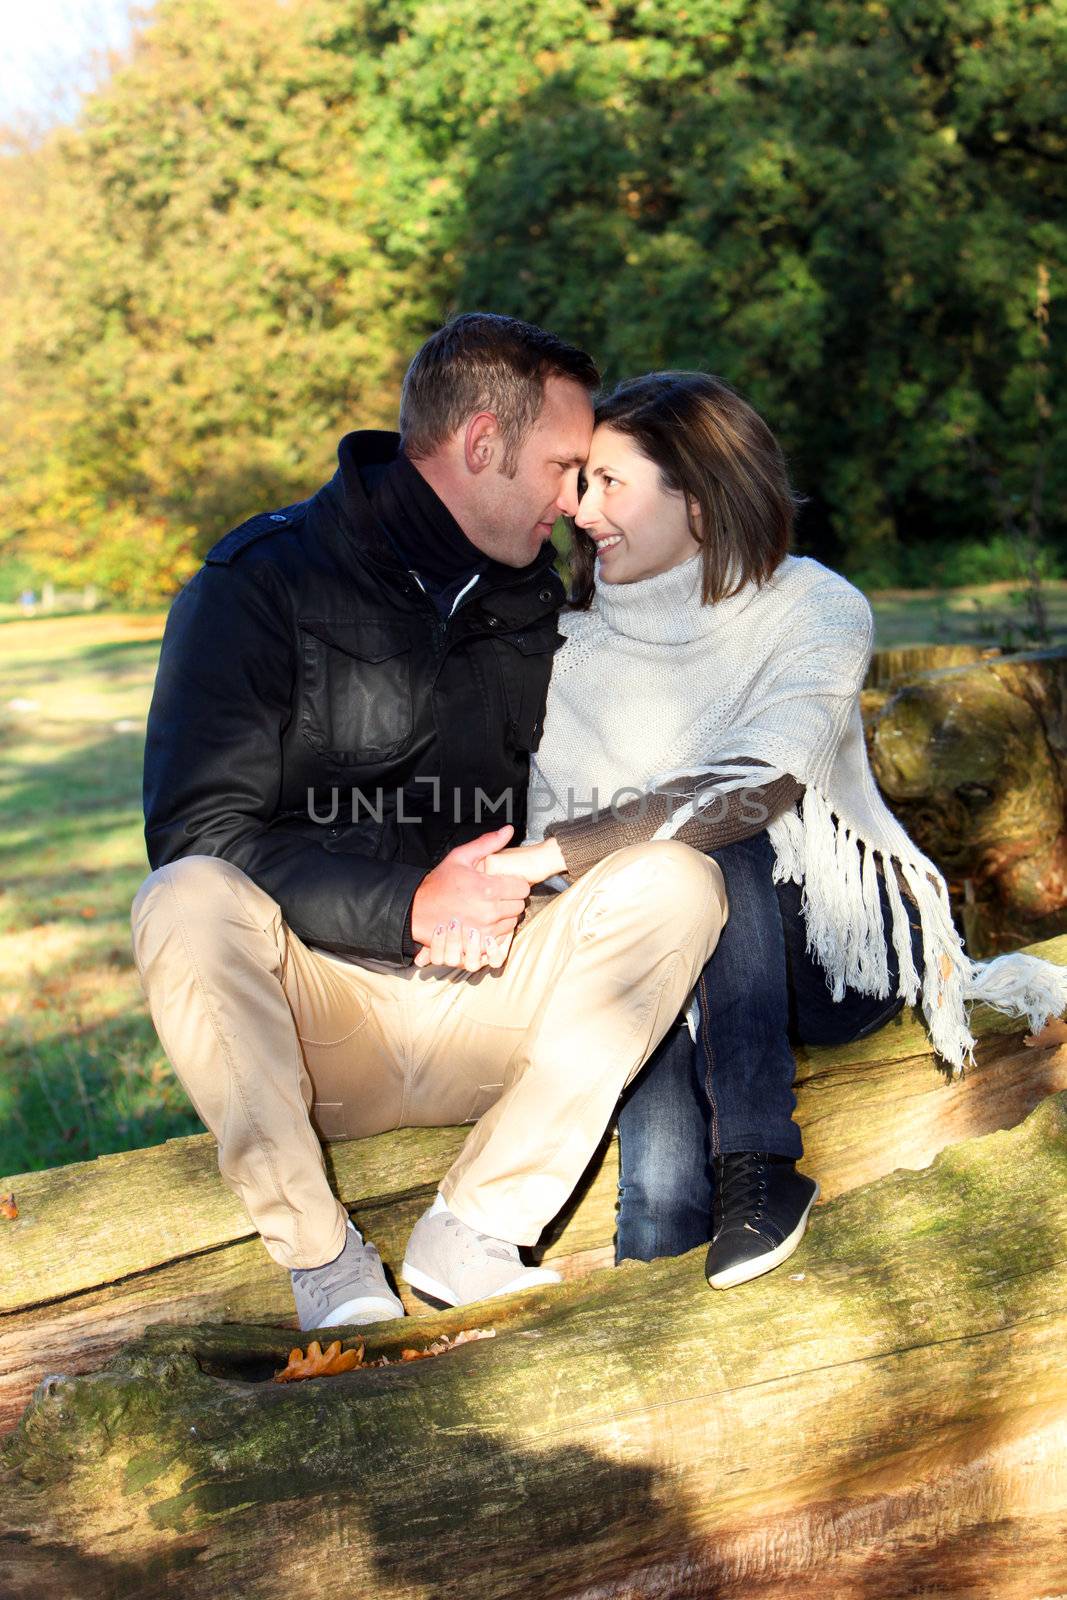 Young couple in love sitting on a fallen log in the countryside looking into each others eyes with tenderness and devotion